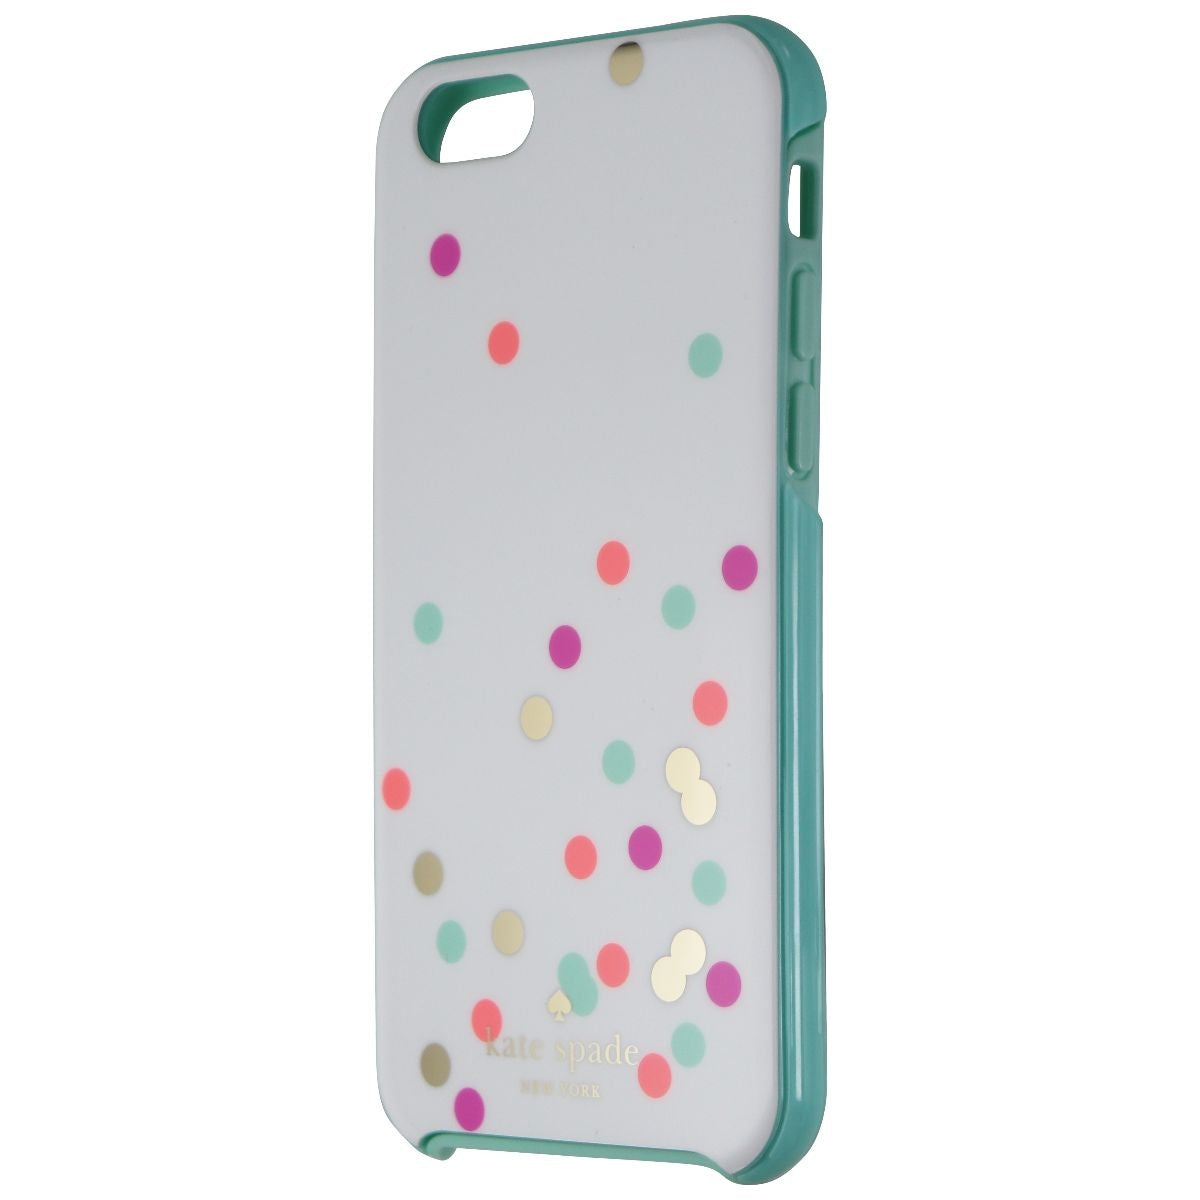 Kate Spade Hybrid Hardshell Case for Apple iPhone 6s/6 - Teal/White/Multi Cell Phone - Cases, Covers & Skins Kate Spade    - Simple Cell Bulk Wholesale Pricing - USA Seller